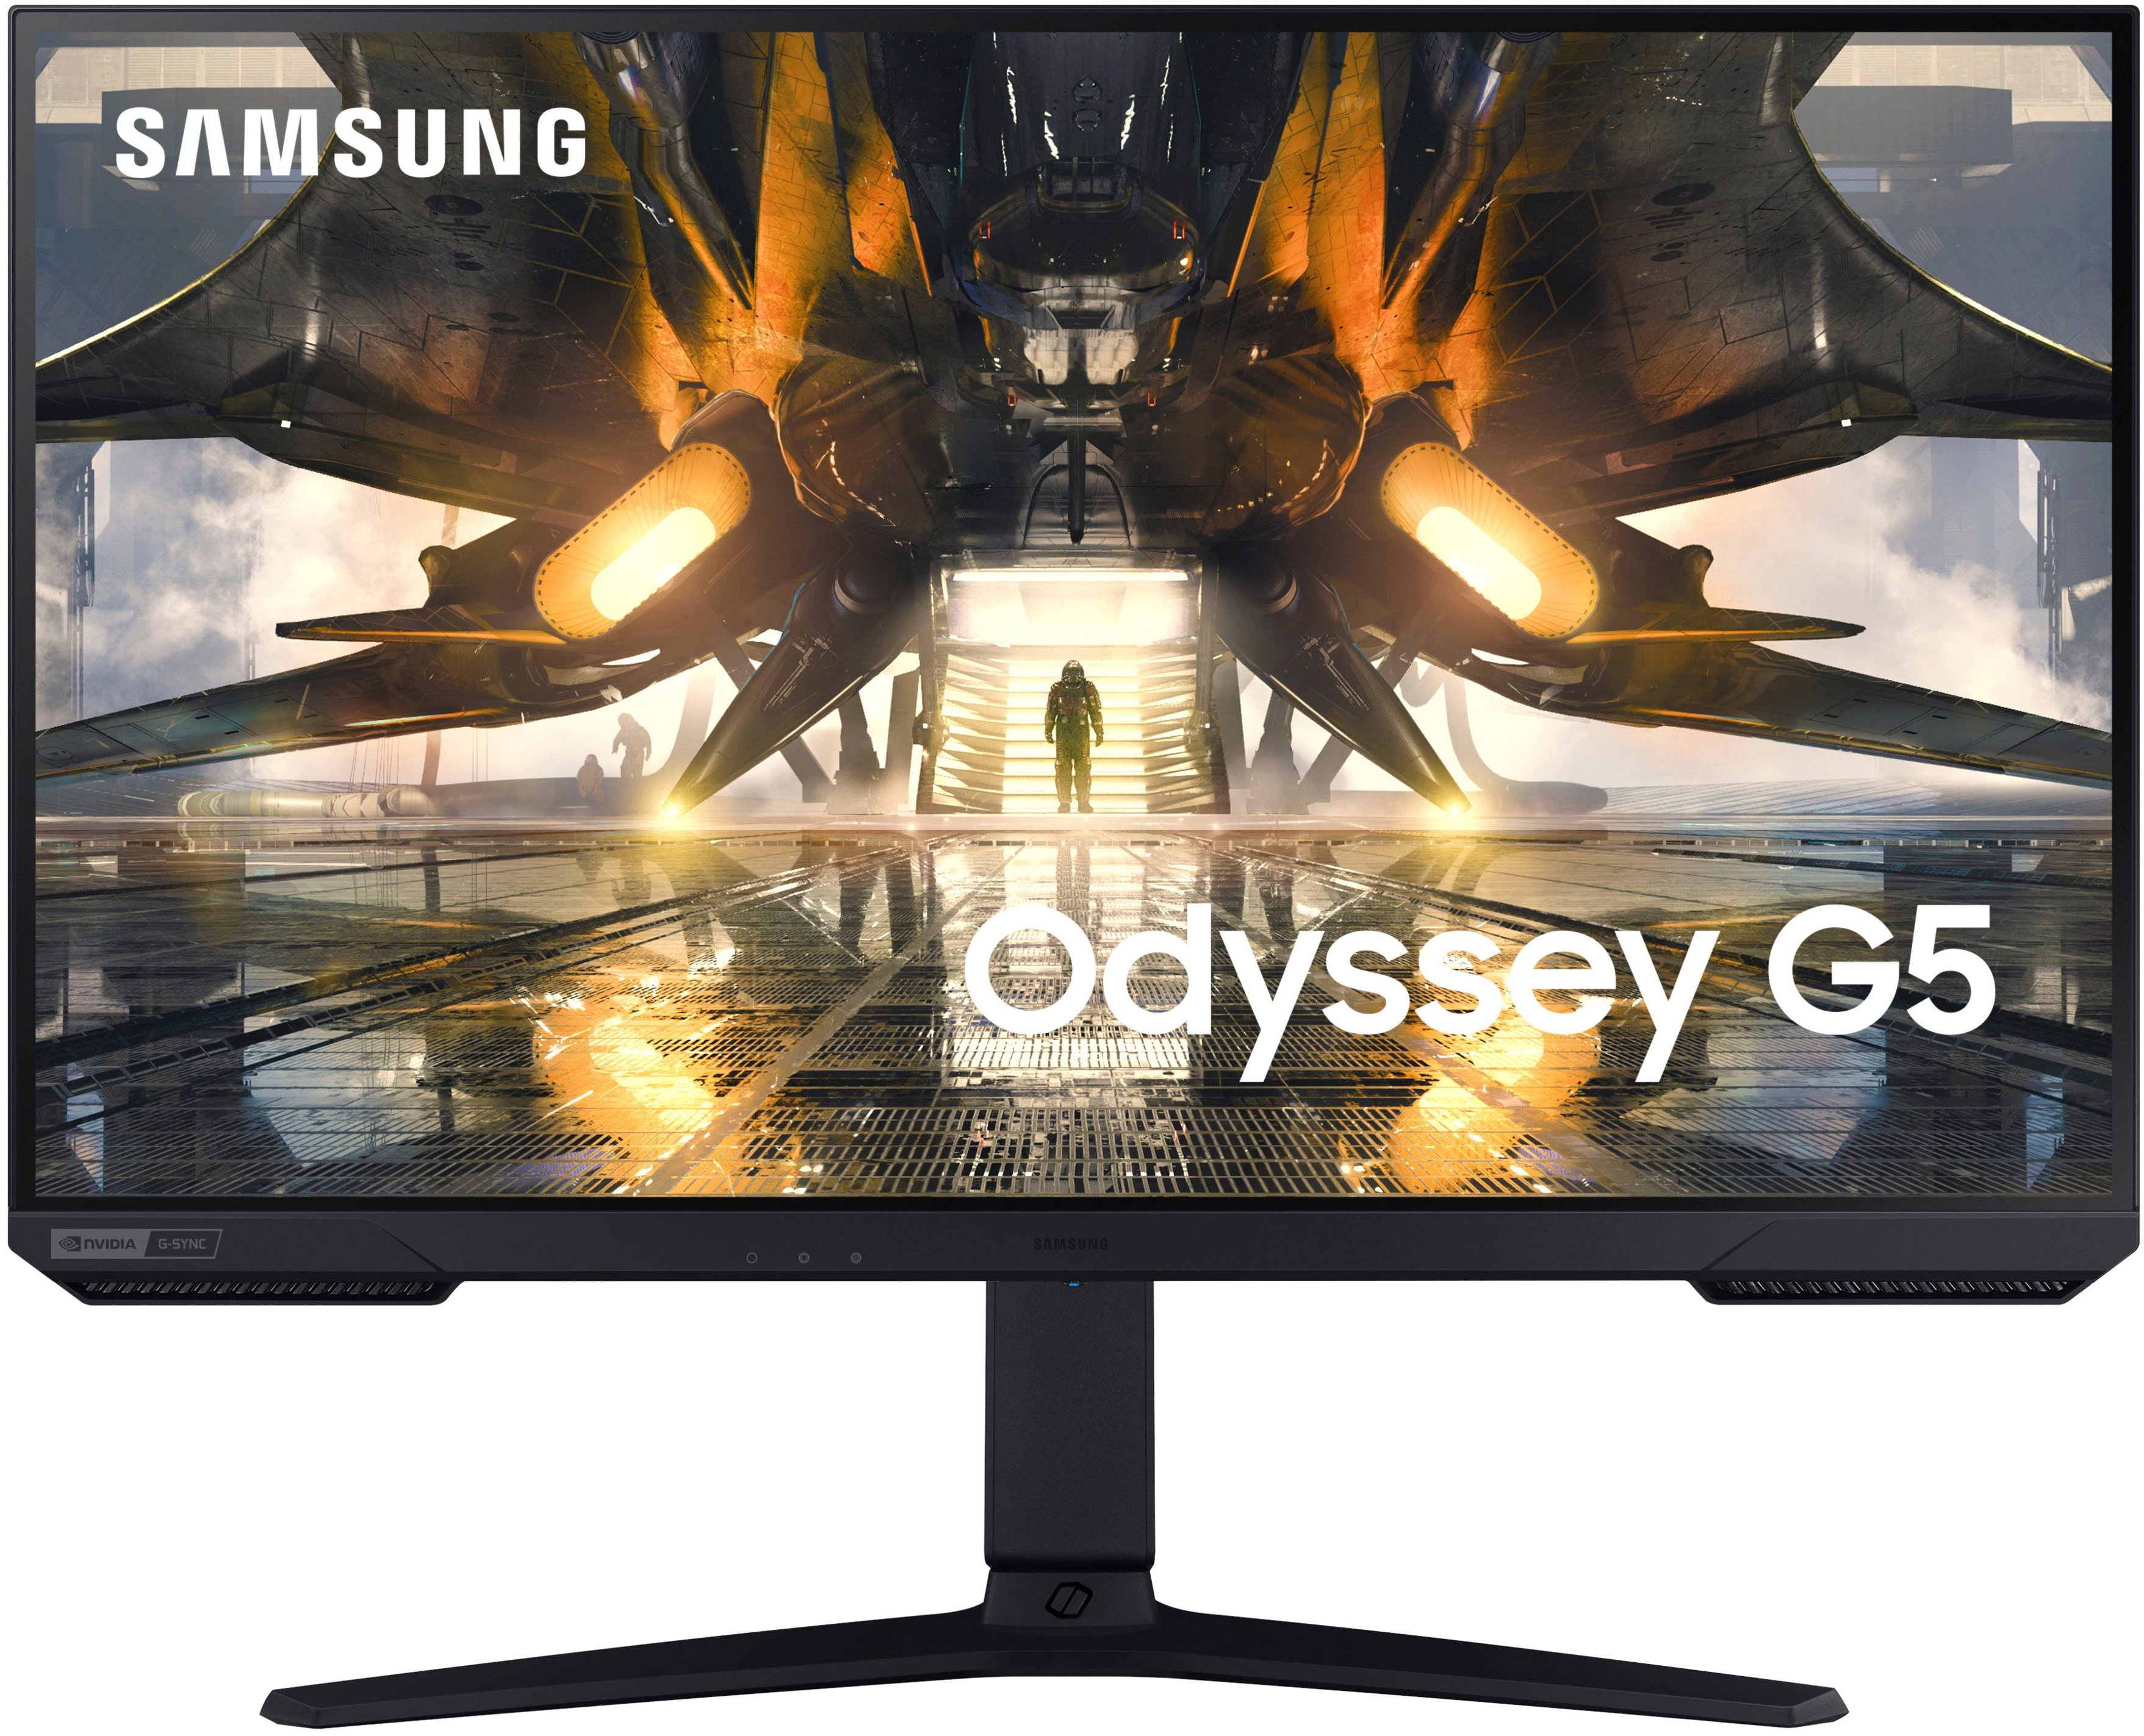 Samsung 27” Odyssey QHD IPS 165 Hz 1ms FreeSync Premium & G-Sync Compatible Gaming Monitor with HDR (Display Port, HDMI) Black LS27AG500PNXZA - Best Buy $249.99